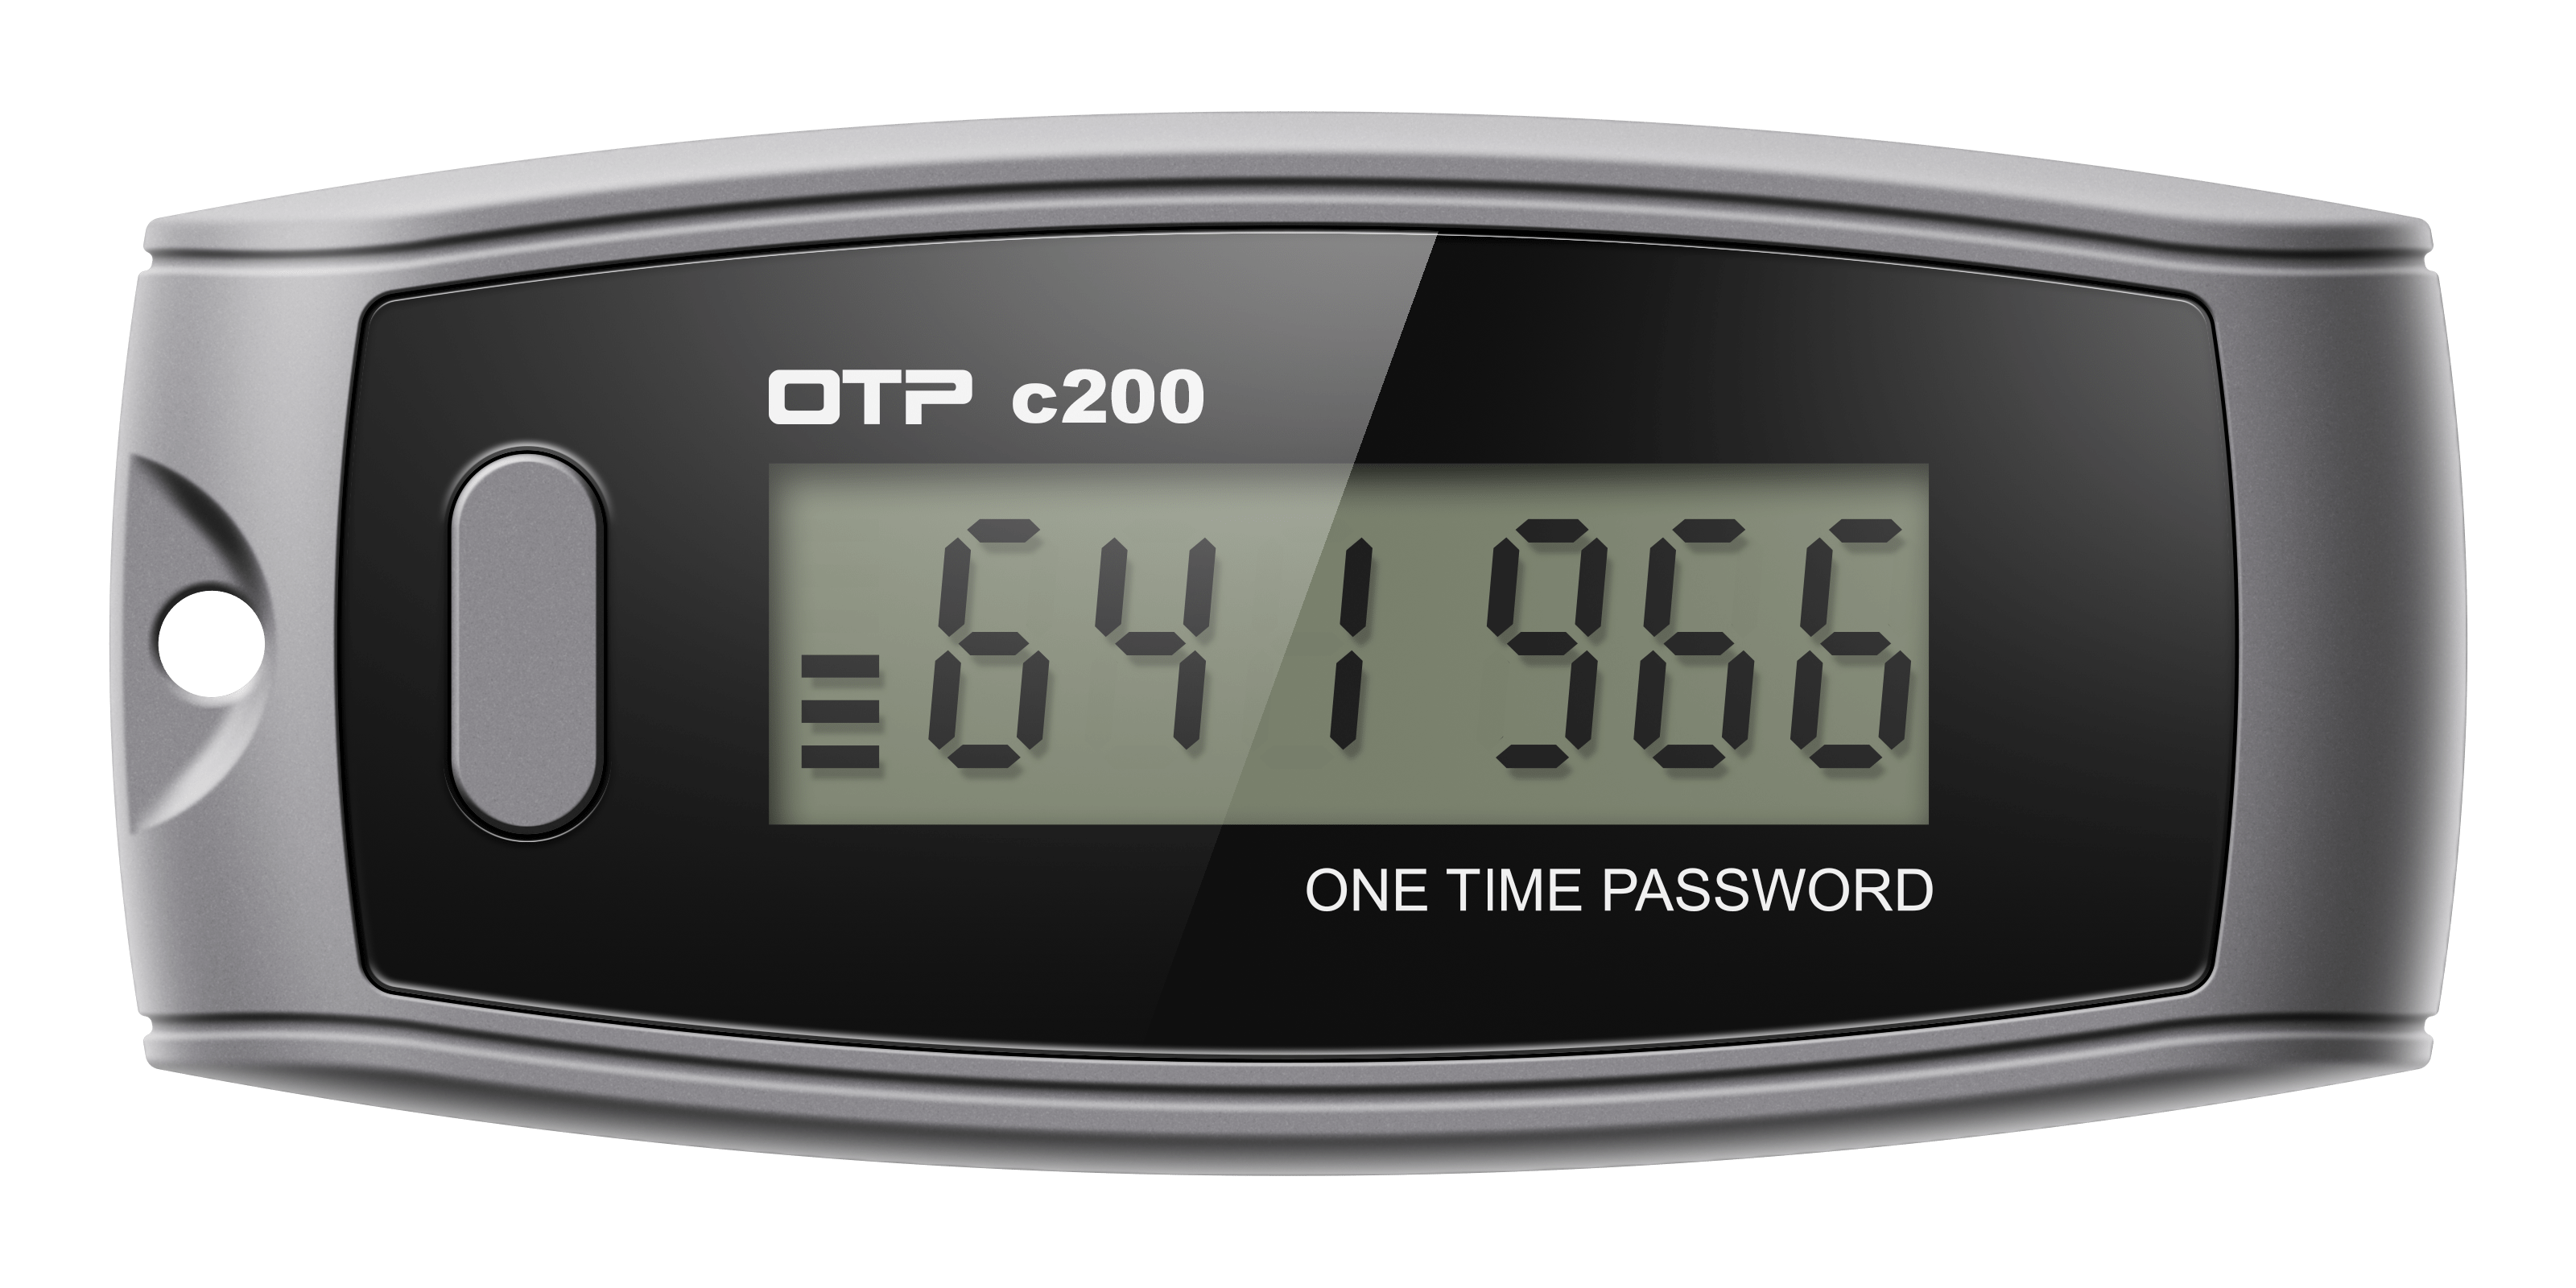 FEITIAN OTP c200 OATH Time-Based 2FA Token (6 Digit) (30 Second Interval) (Casing: H27) - FEITIAN Technologies US